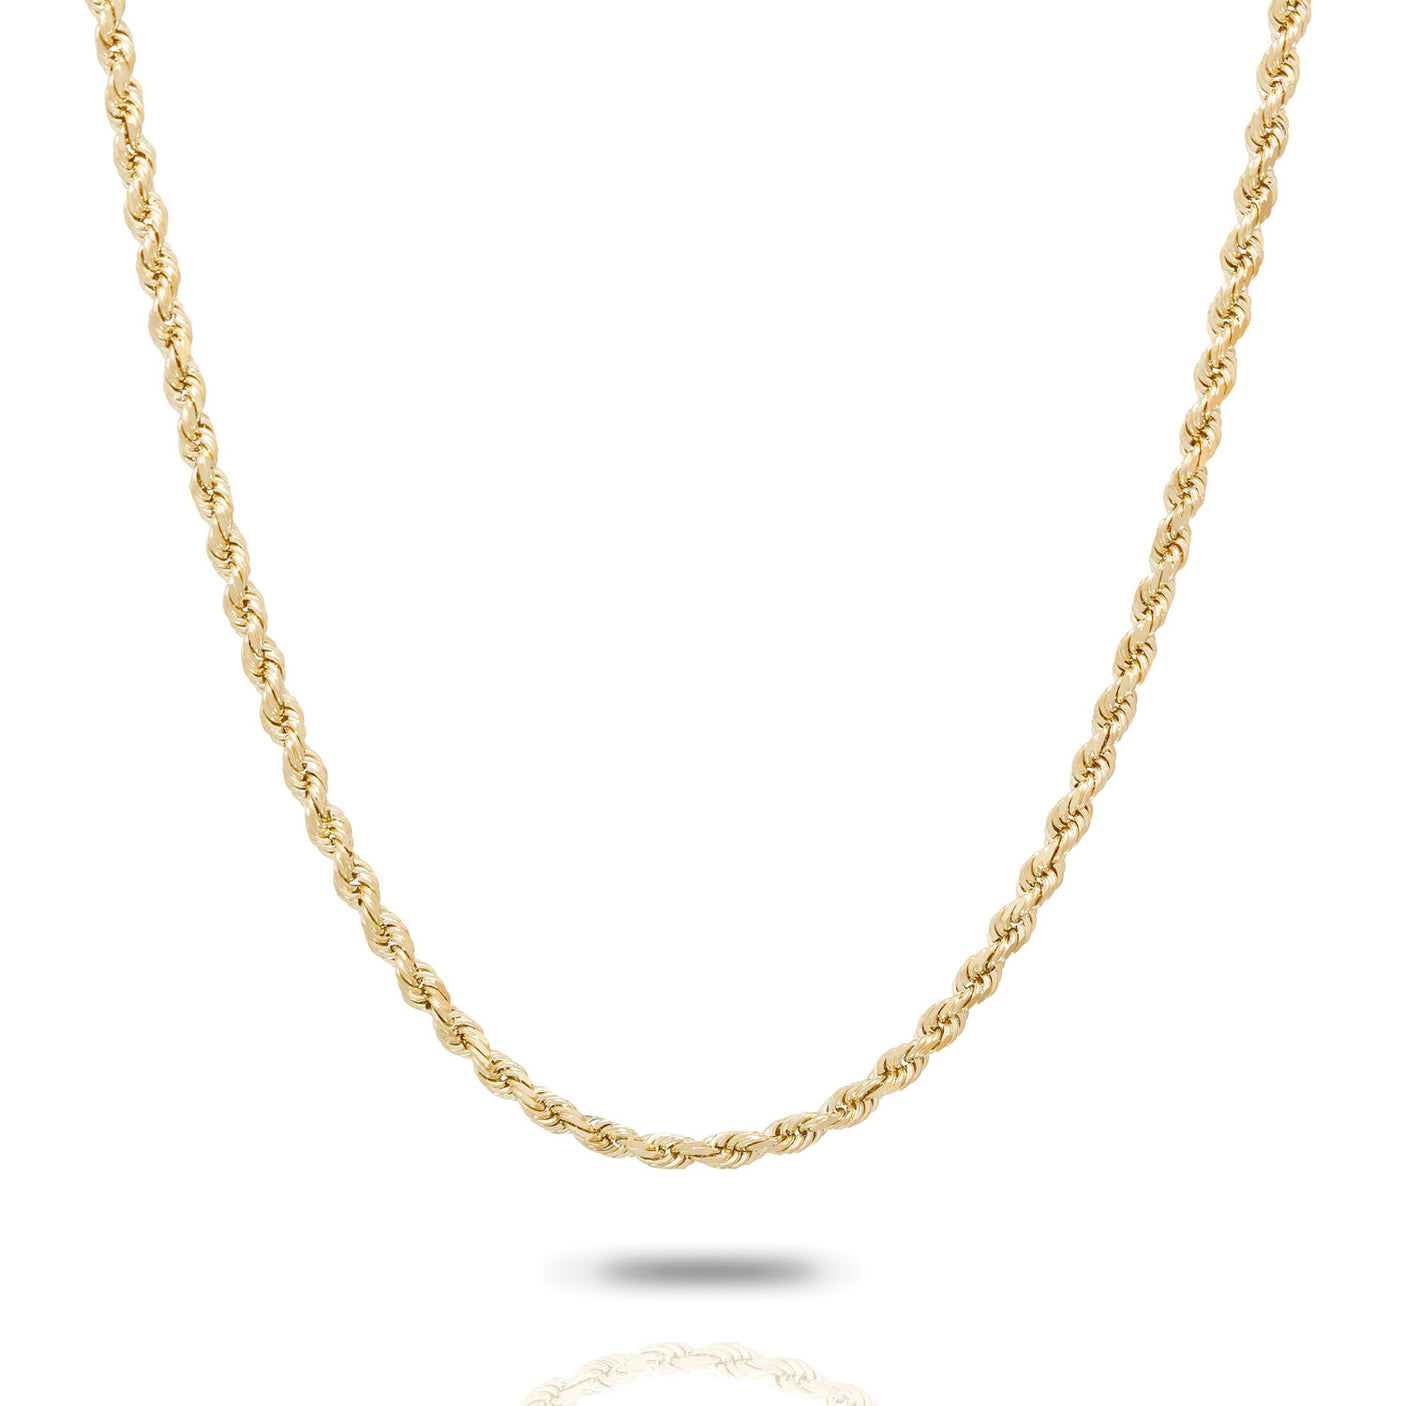 10k 14k Solid Gold Diamond Cut Rope Chain The Gold Gods 4mm 22 inch